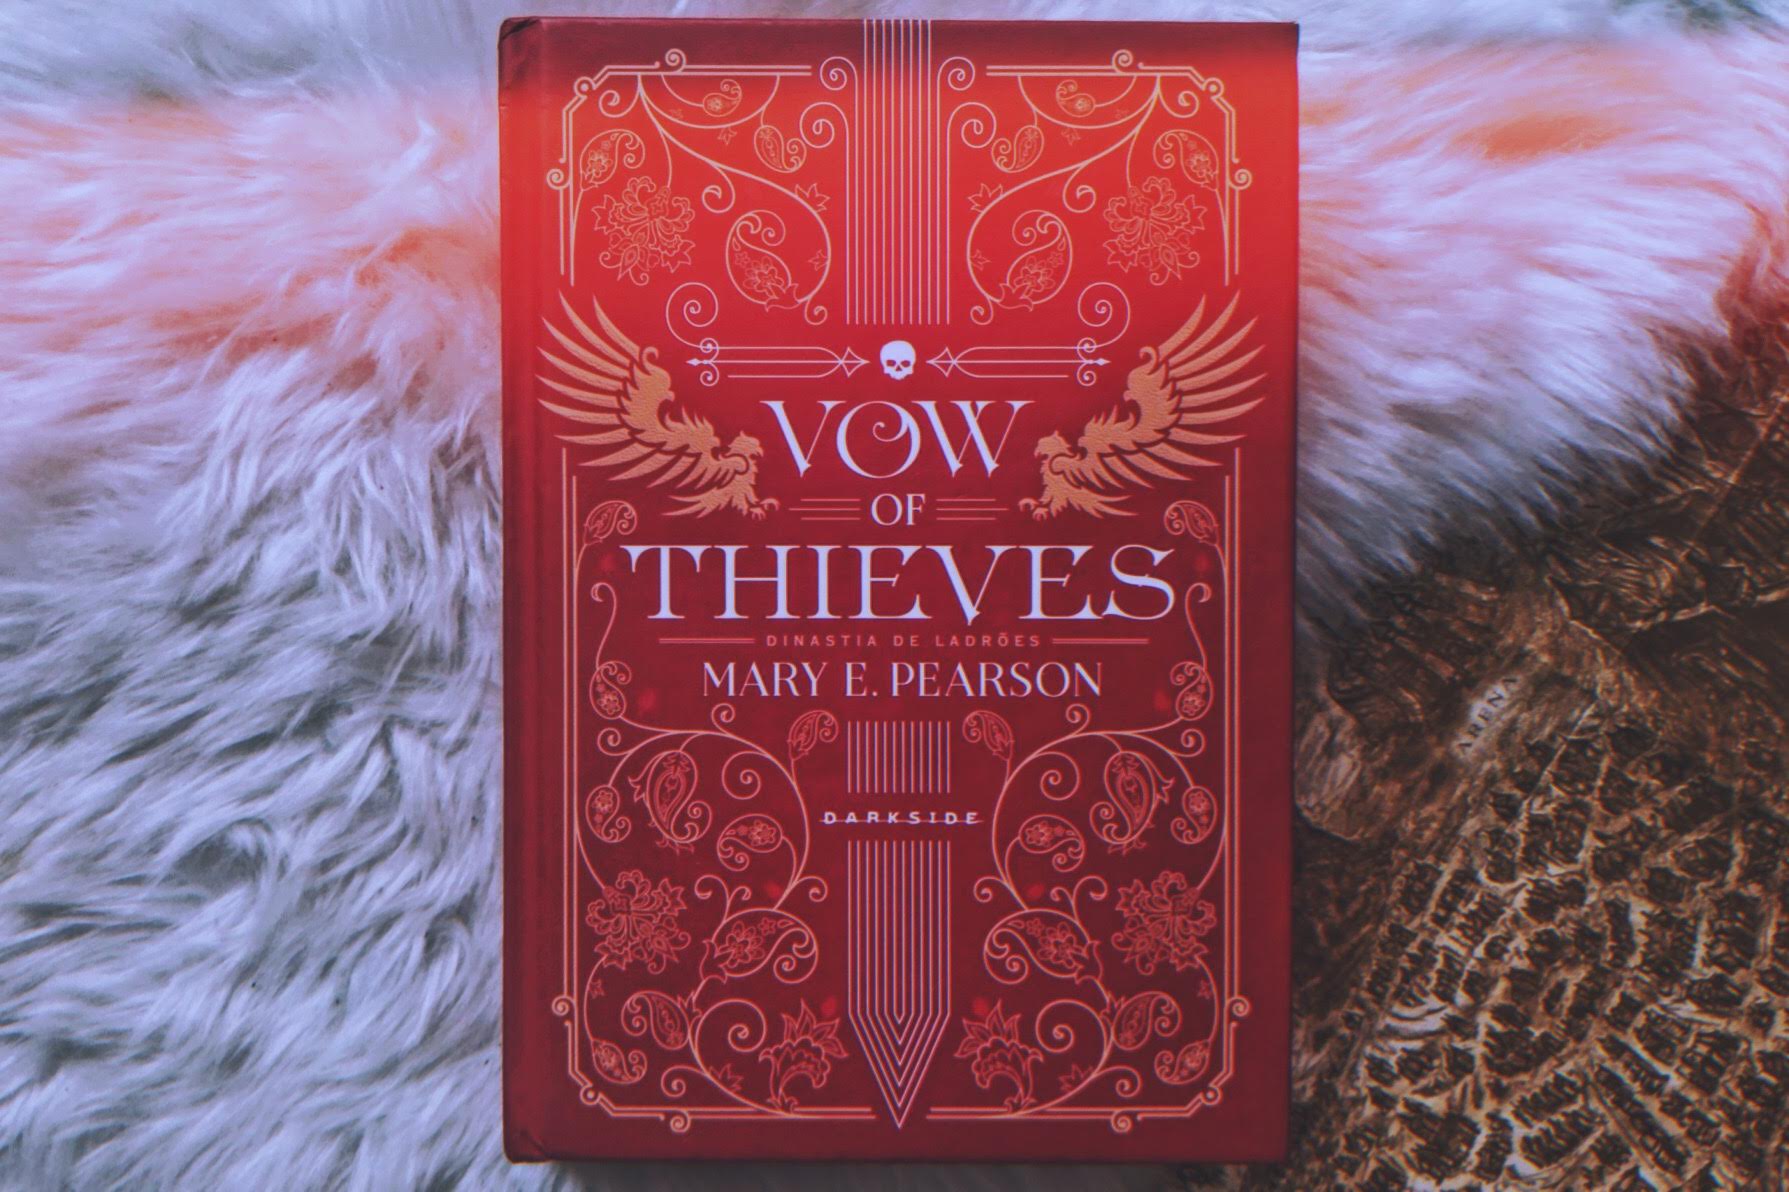 Vow of Thieves - resenha